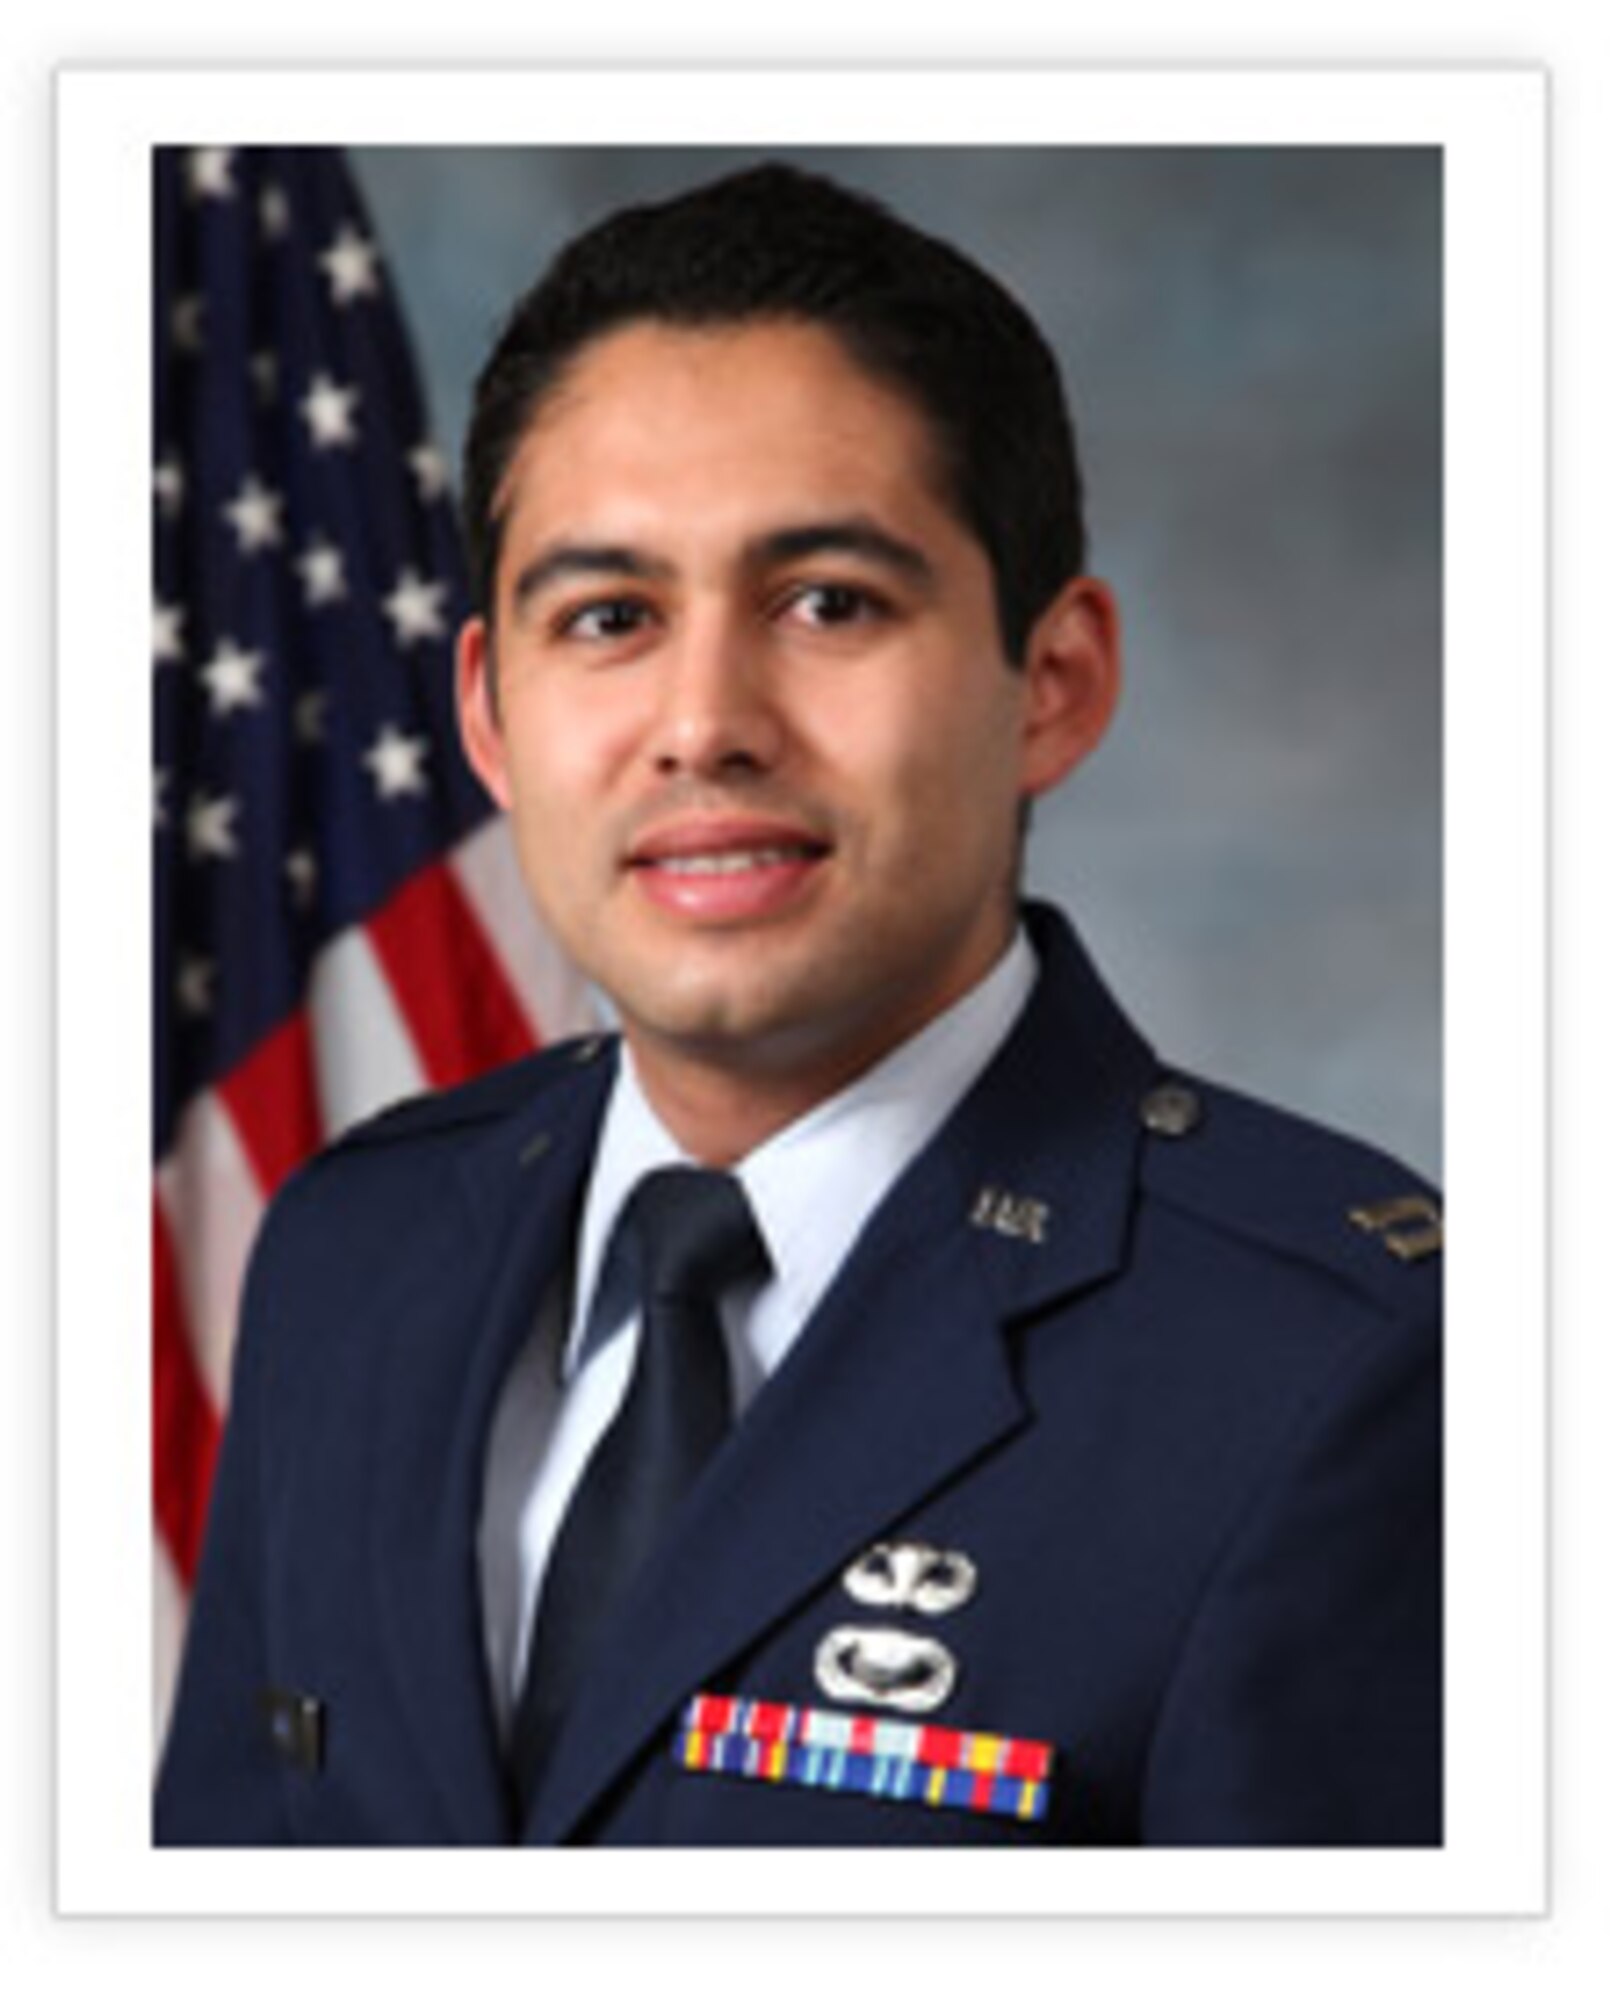 Capt Daniel Uribe will be honored at the 27th Annual HENAAC STEM Career Conference with the 2015 HENAAC Most Promising Scientist or Engineer-Advanced Degree - Master's Award for his  outstanding contributions to STEM programs.